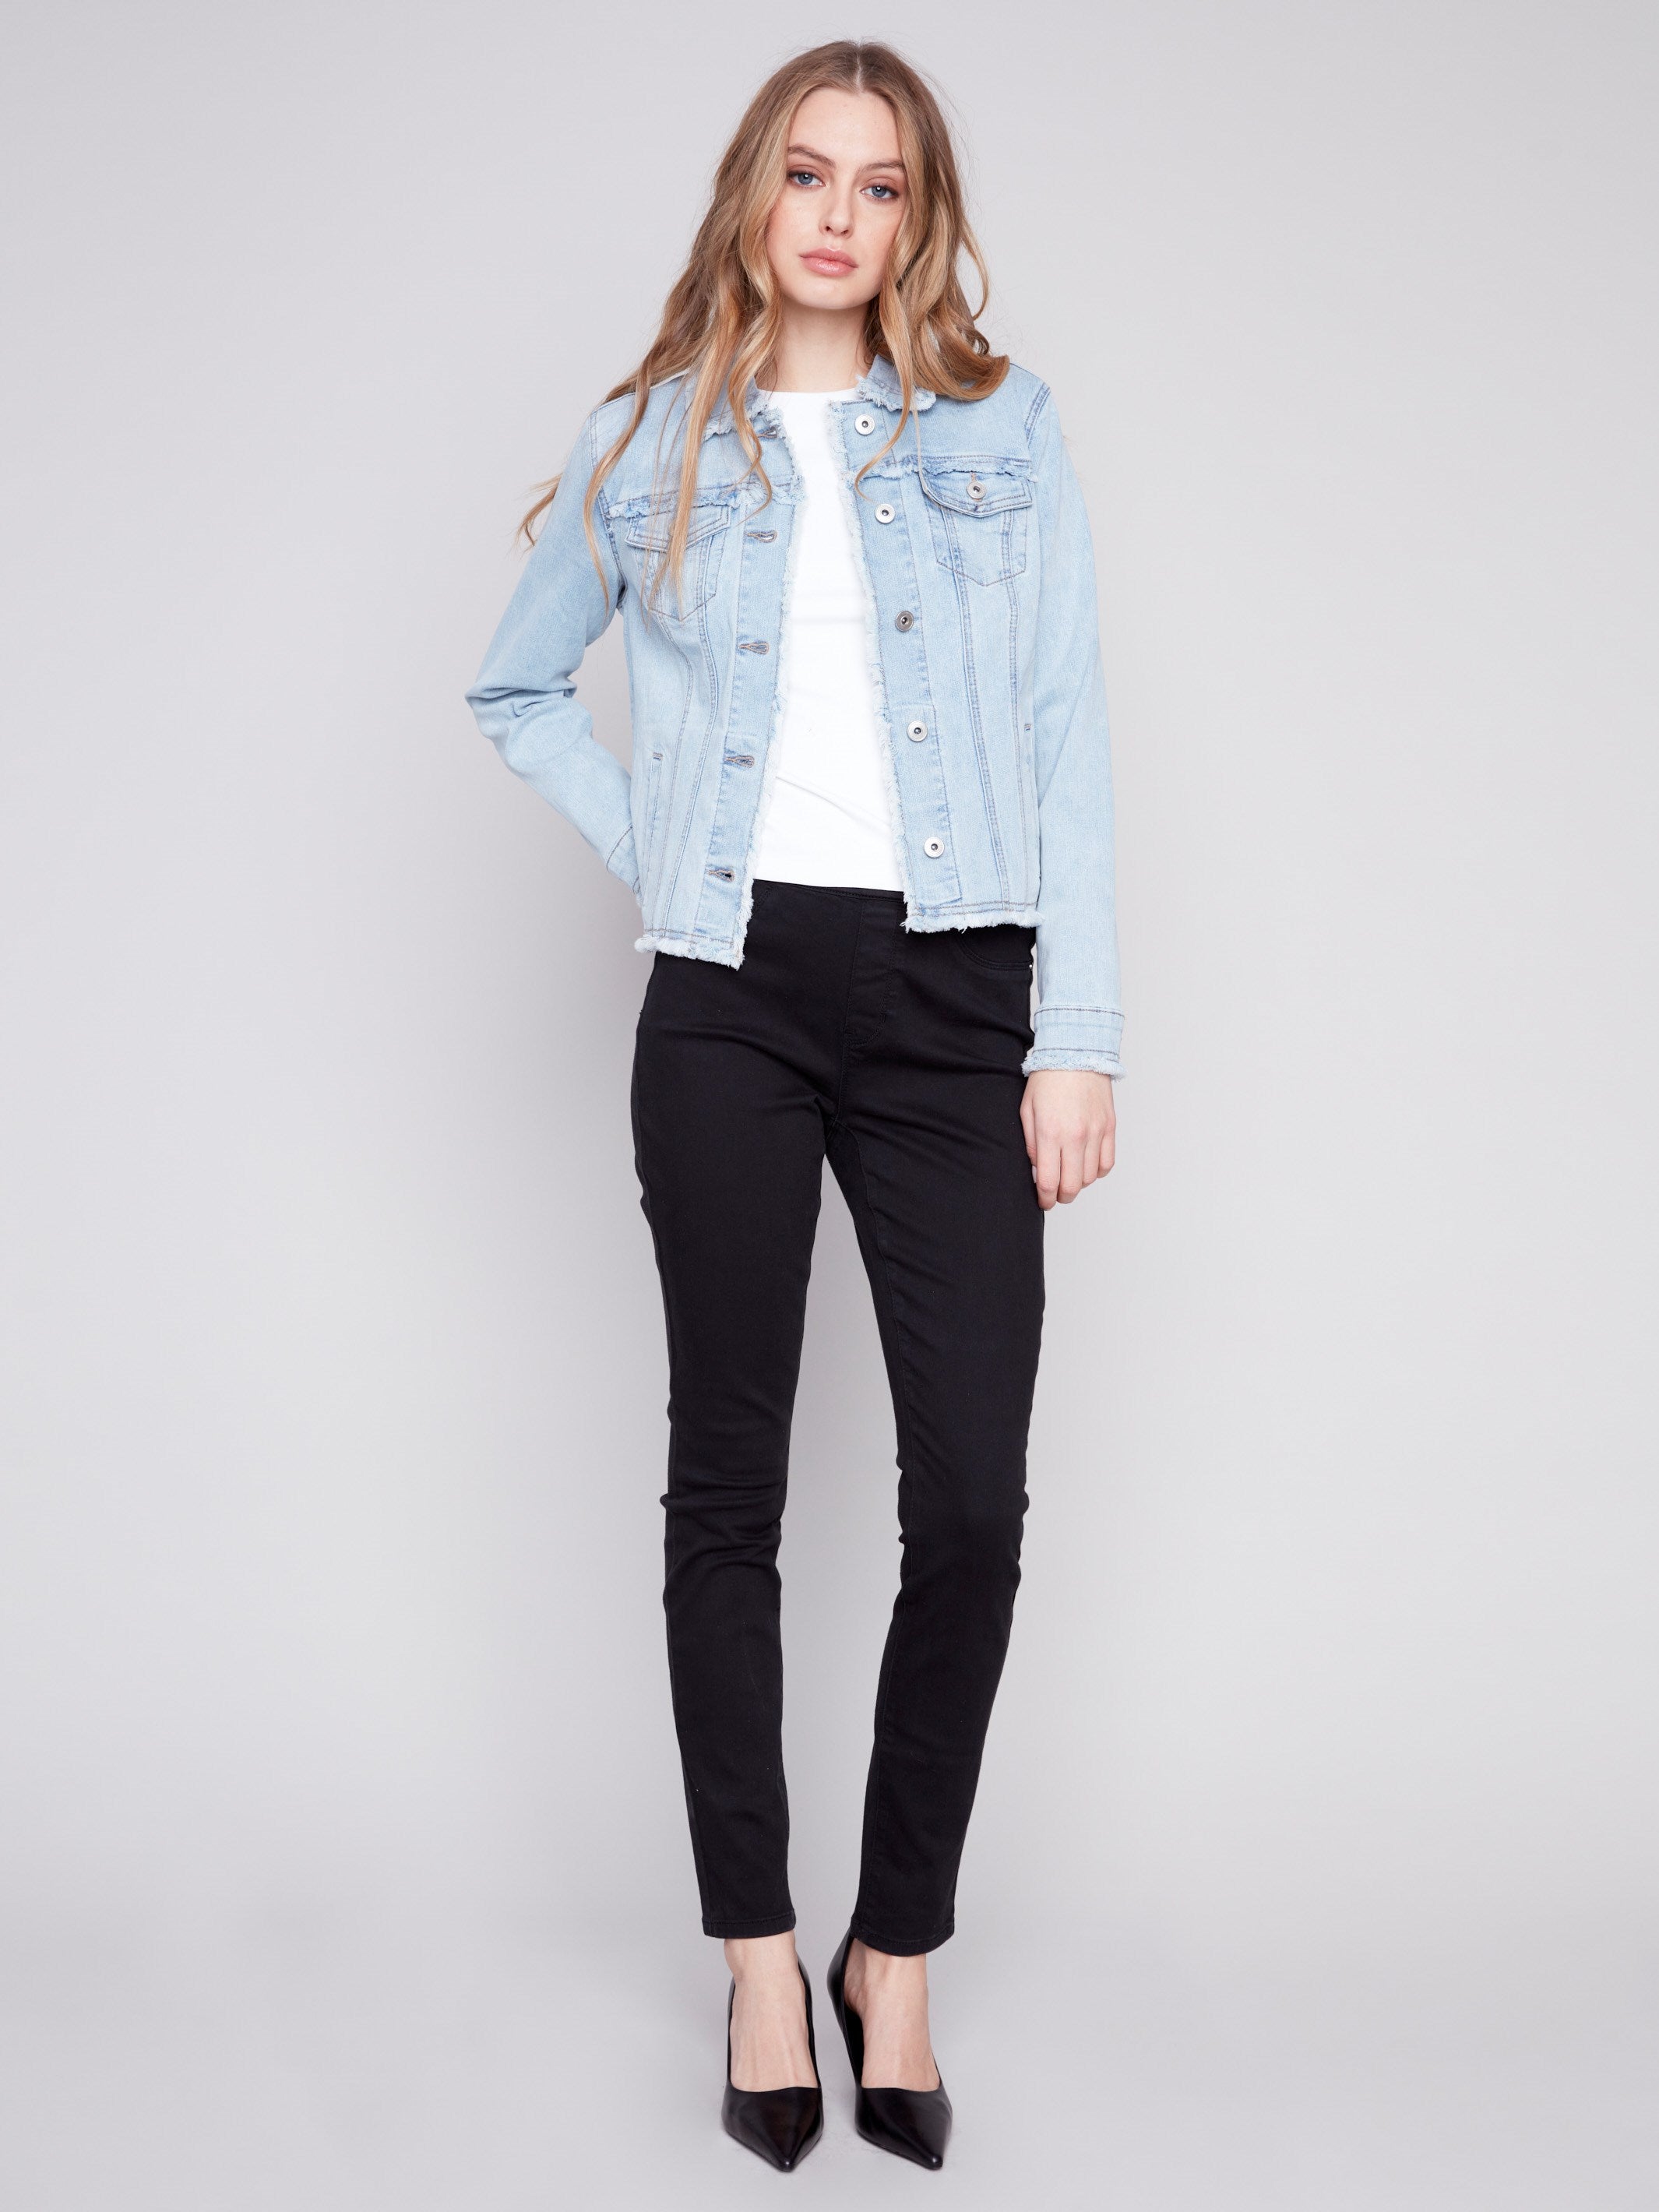 Jean Jacket with Frayed Edges - Bleach Blue - Charlie B Collection Canada - Image 3